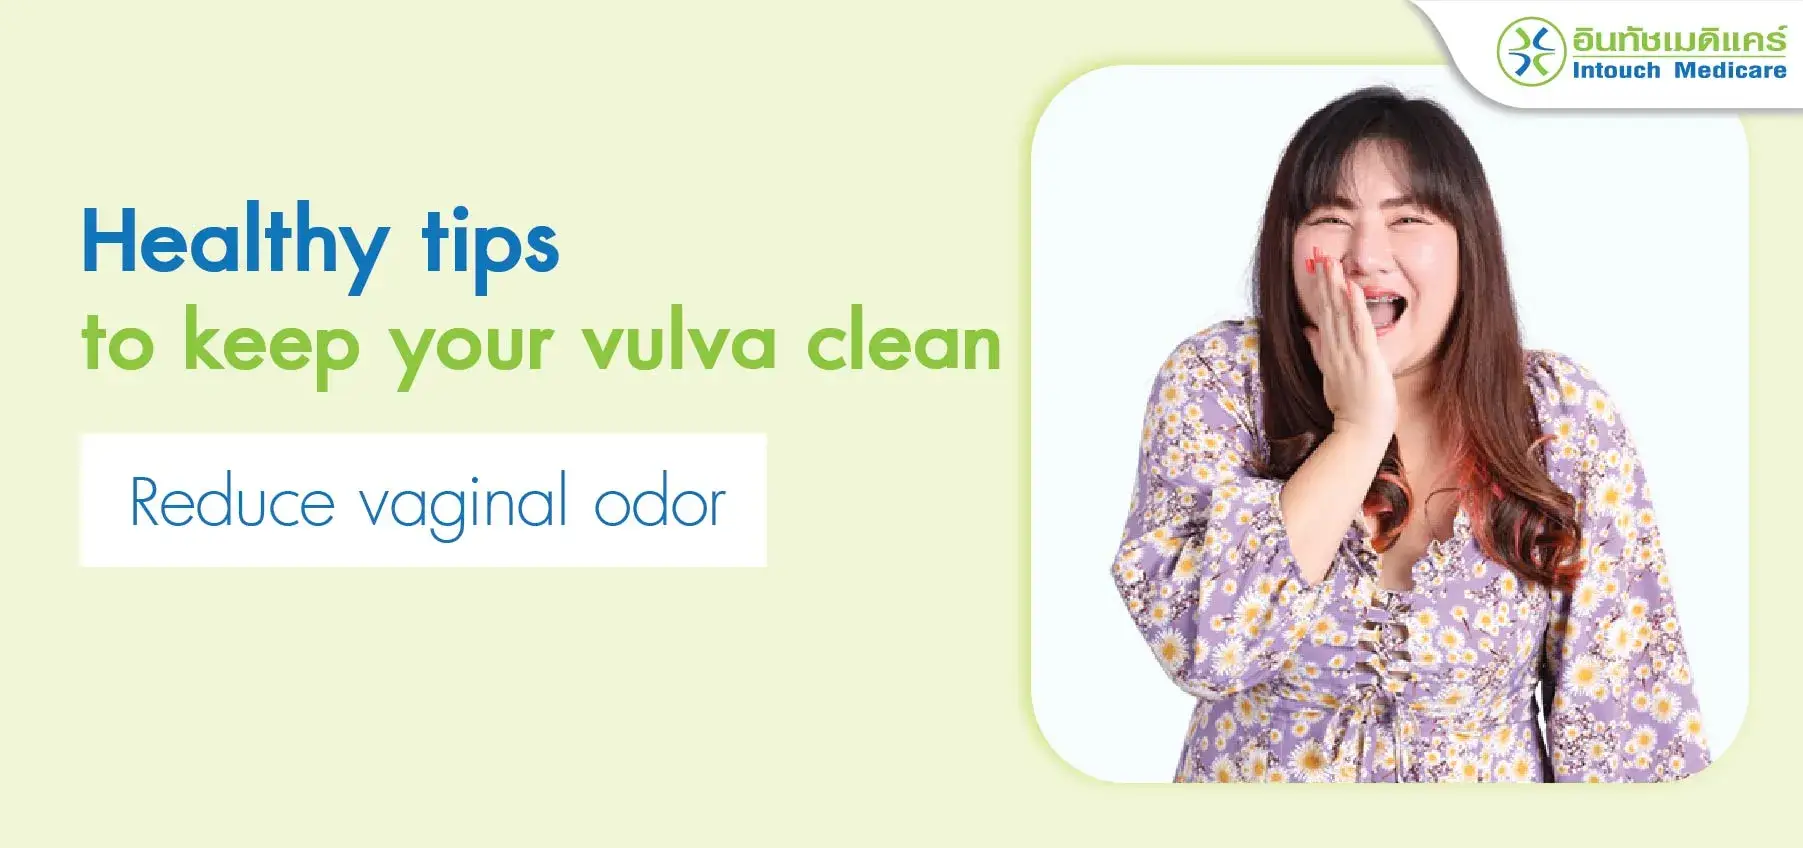 Healthy tips to keep your vulva clean reduce vaginal odor